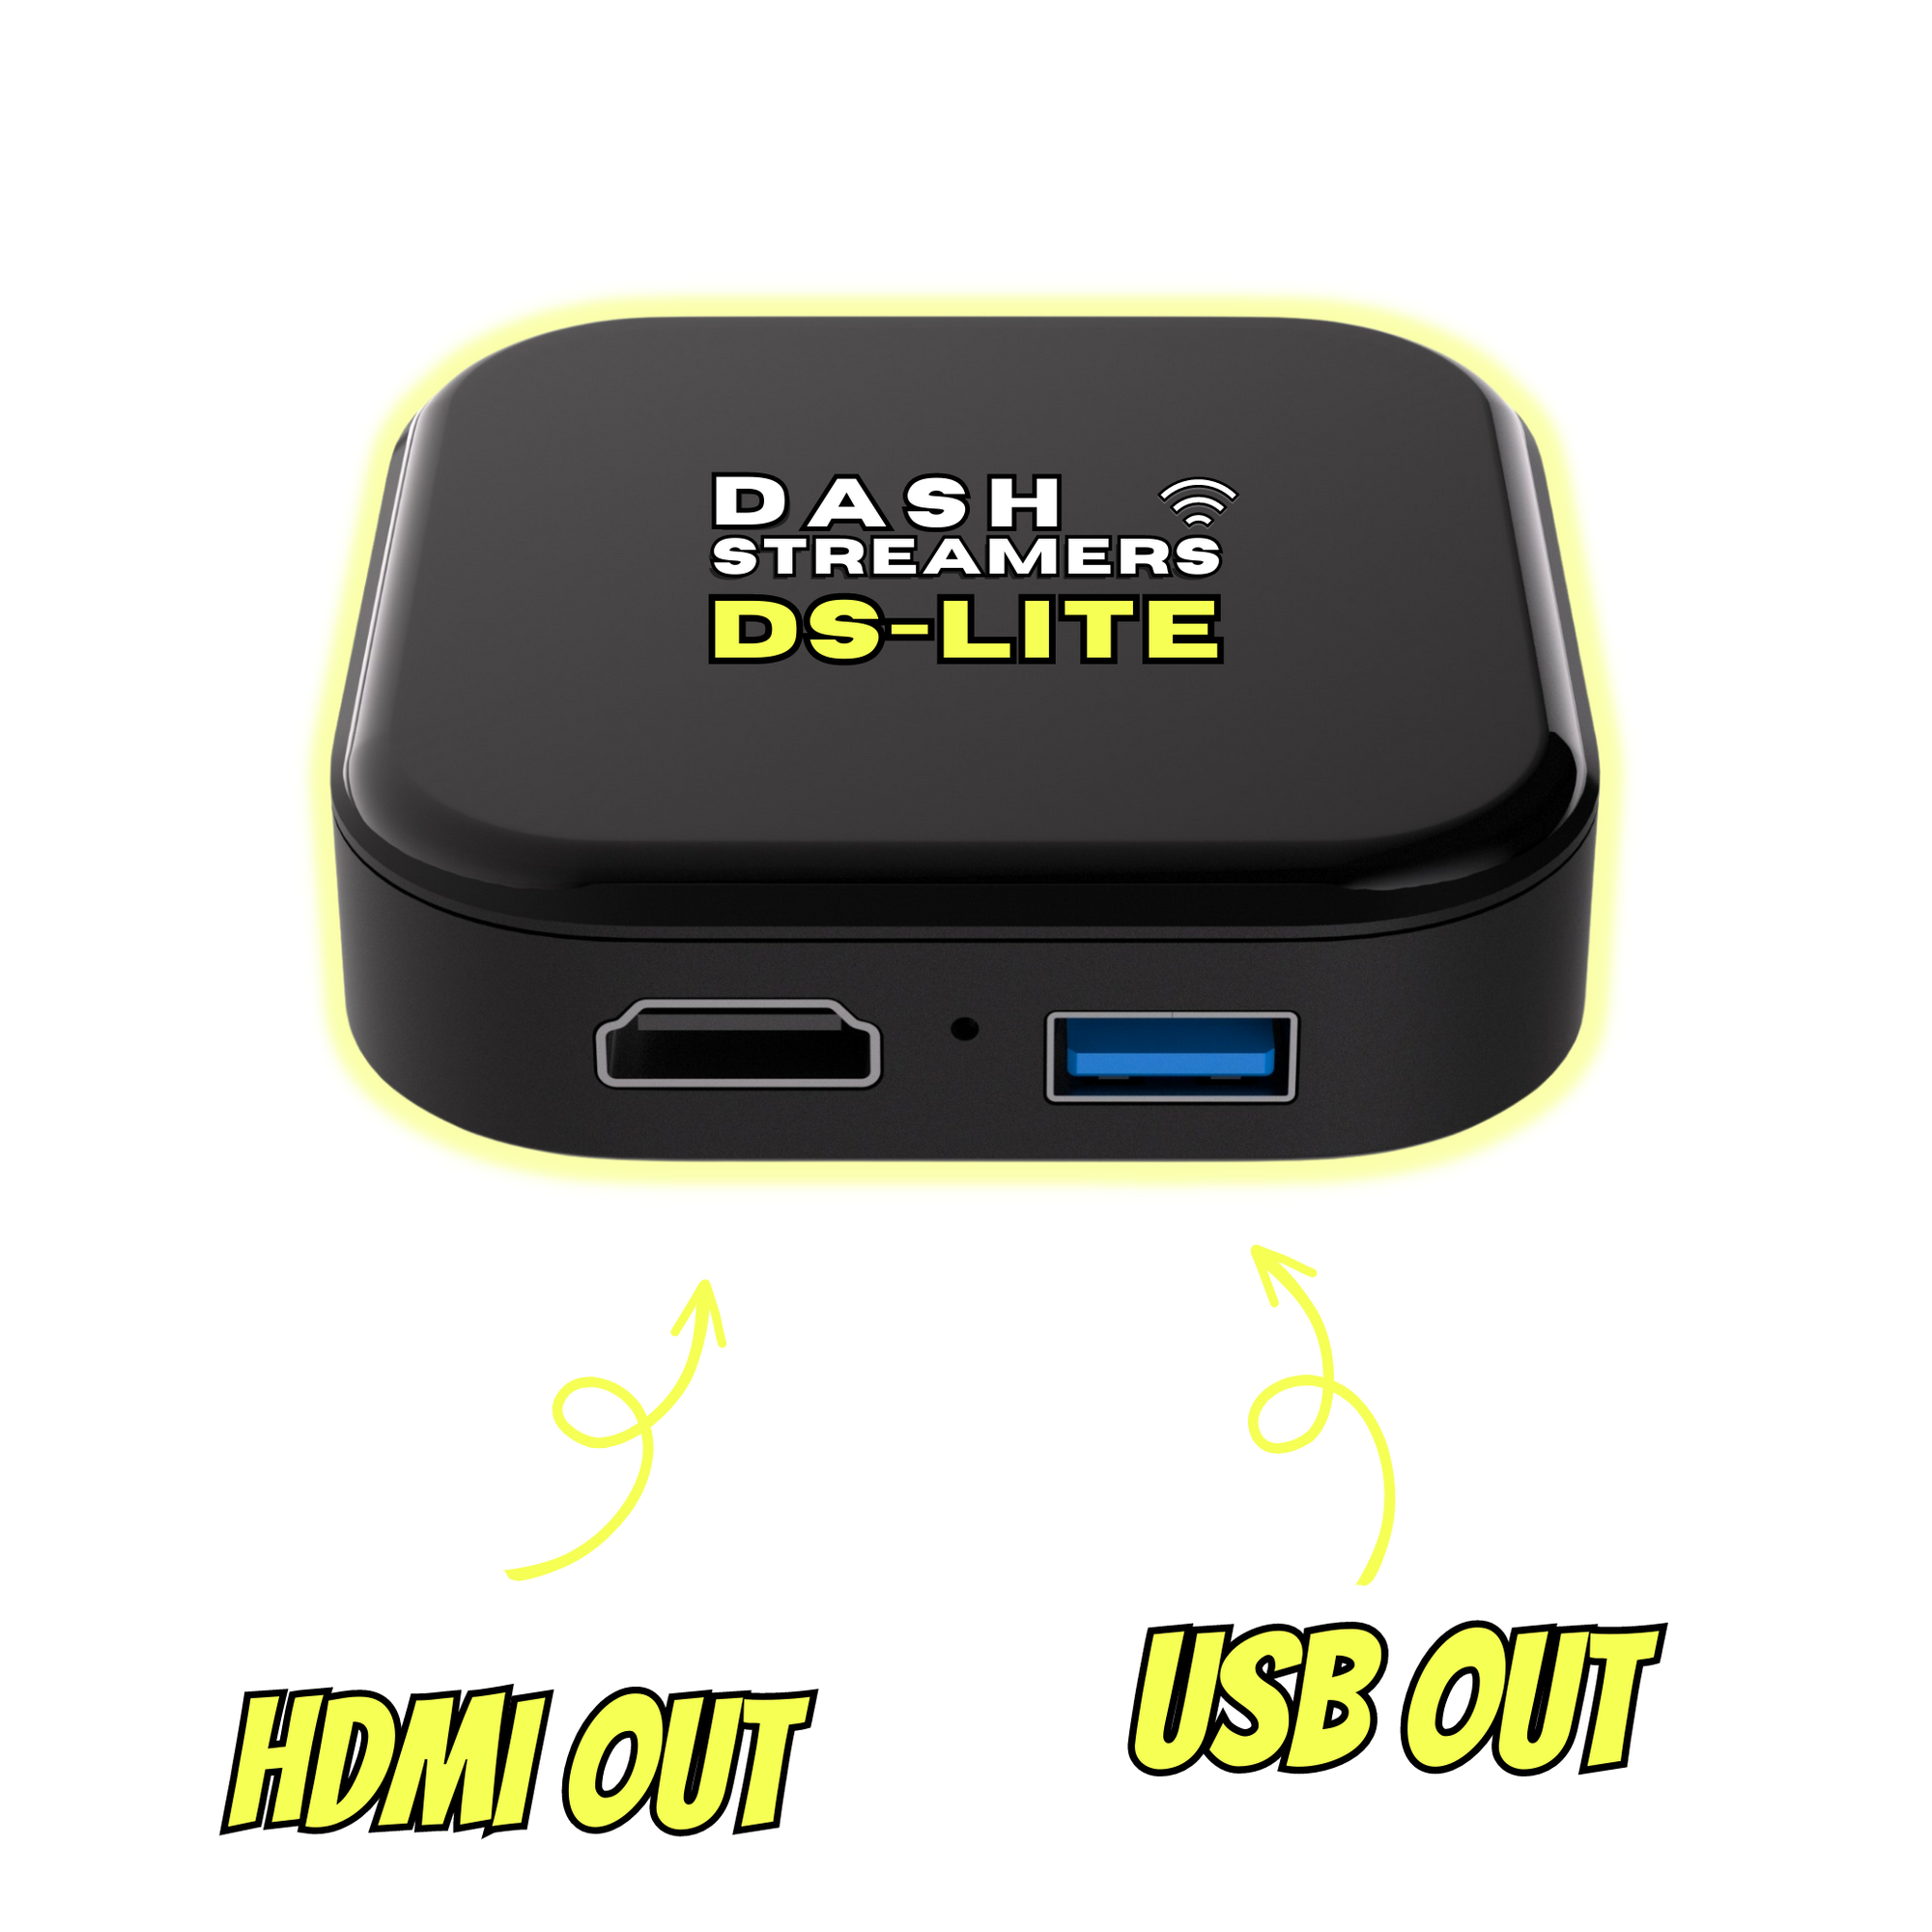 DS-Lite (For Cars with Factory Apple CarPlay) - Dash Streamers